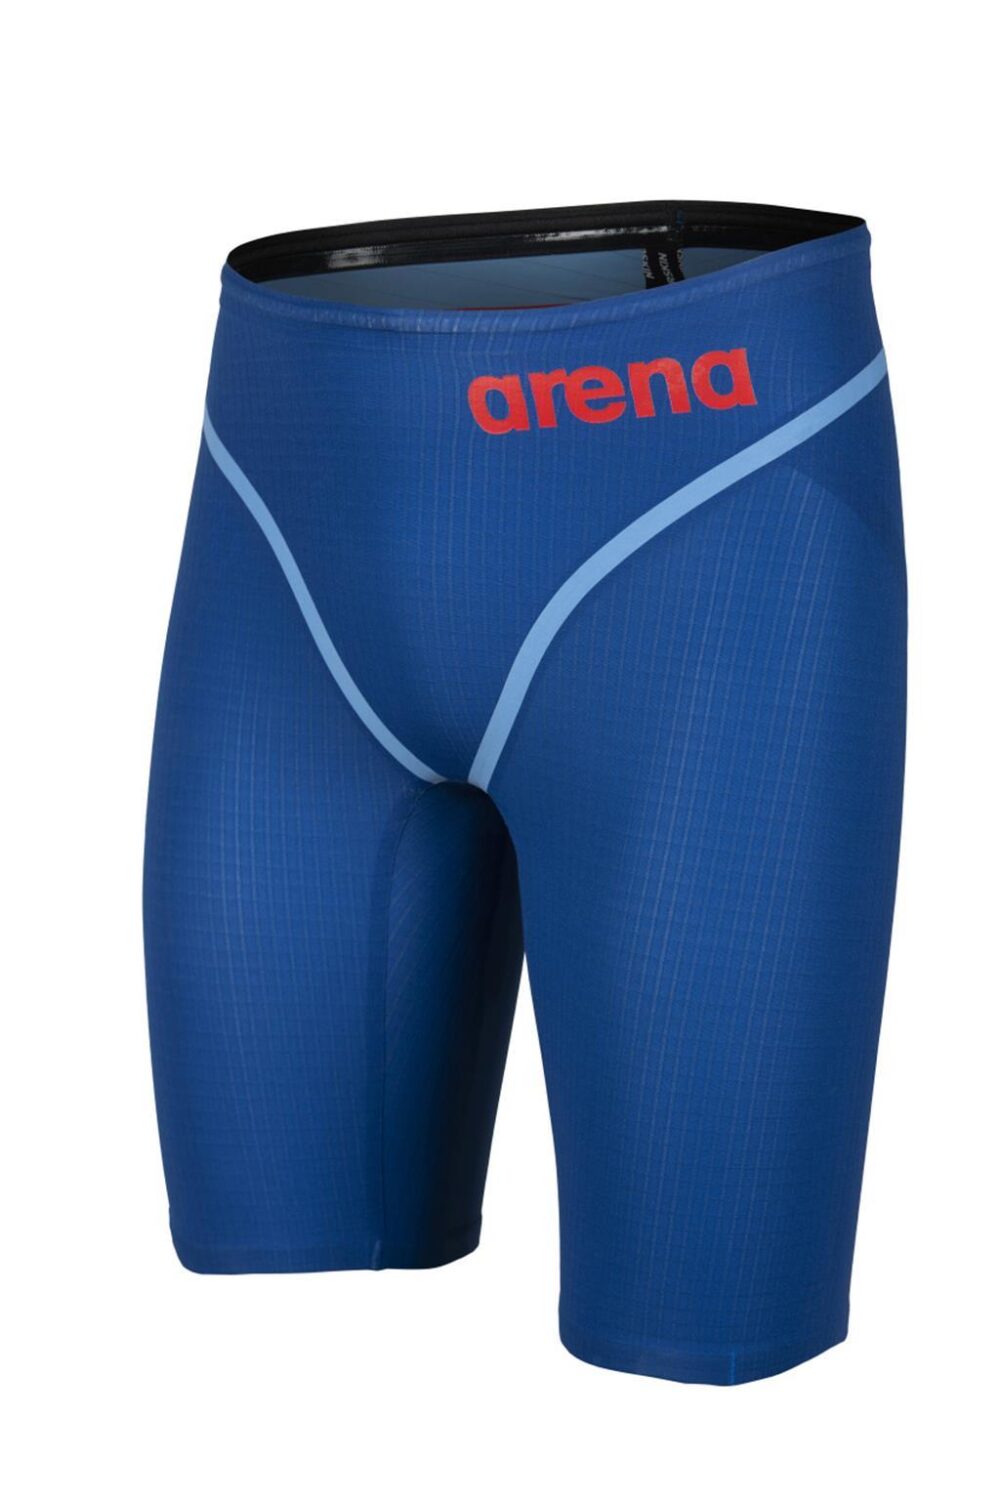 ARENA CARBON CORE JAMMER Oceanblue